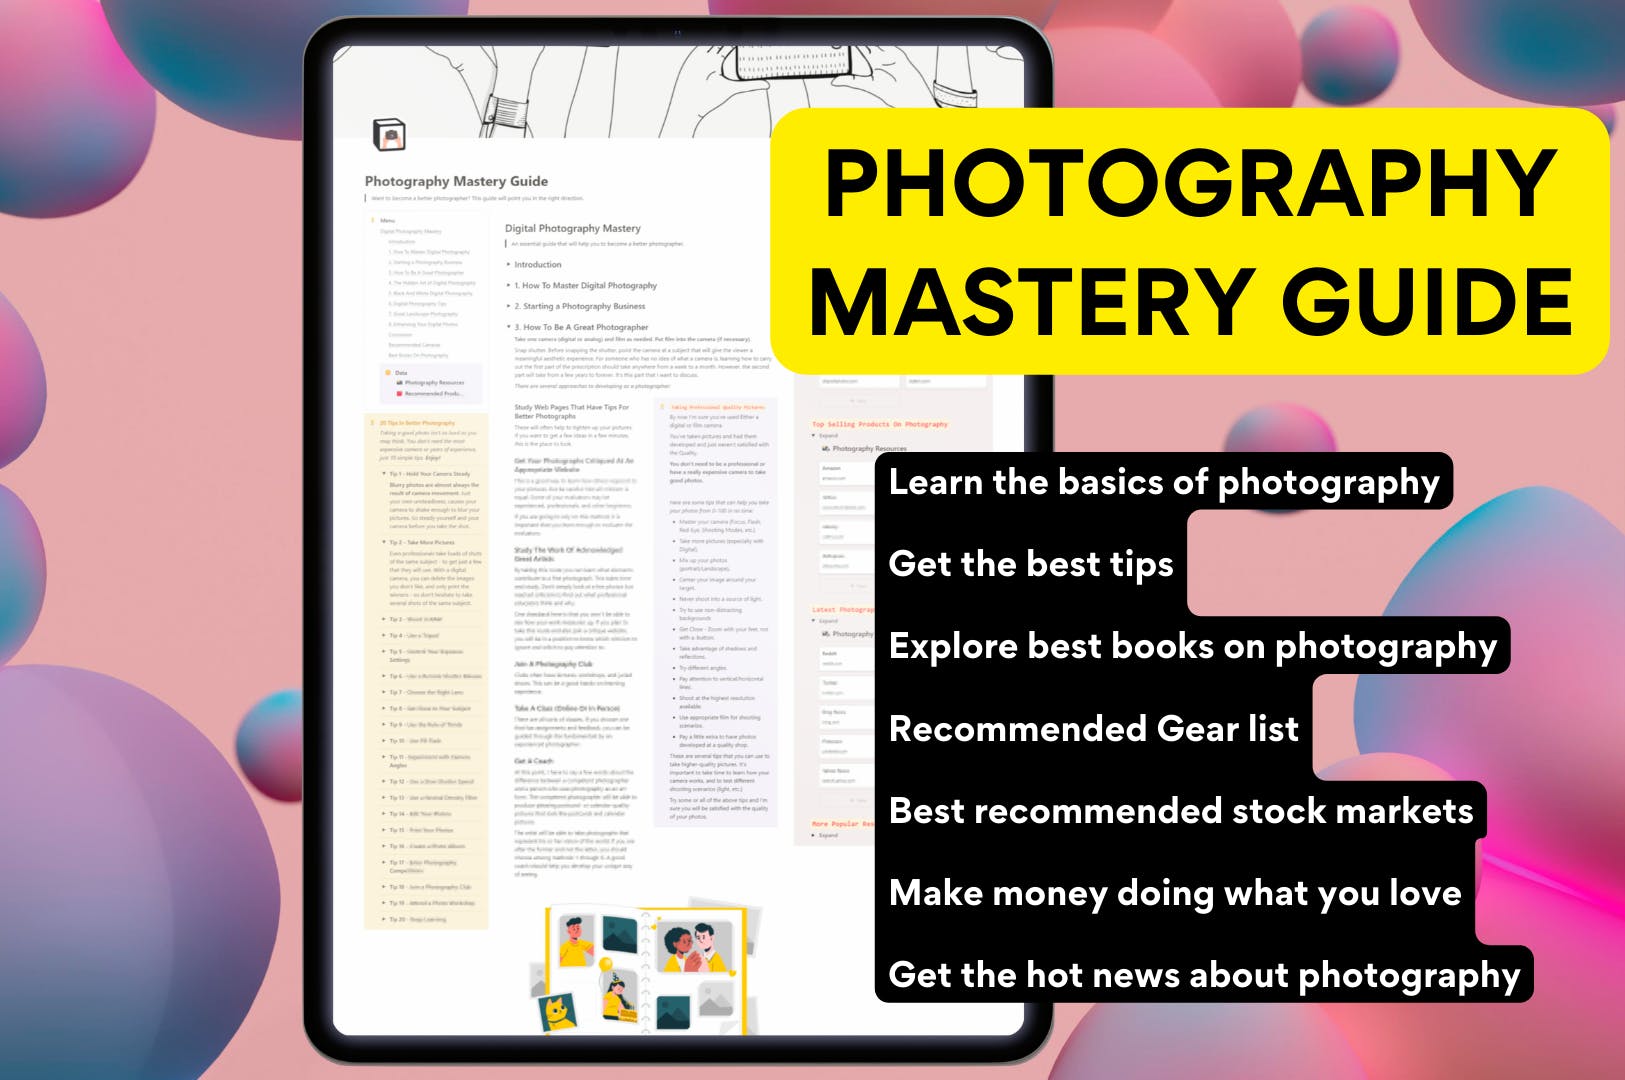 Photography Mastery Guide media 3